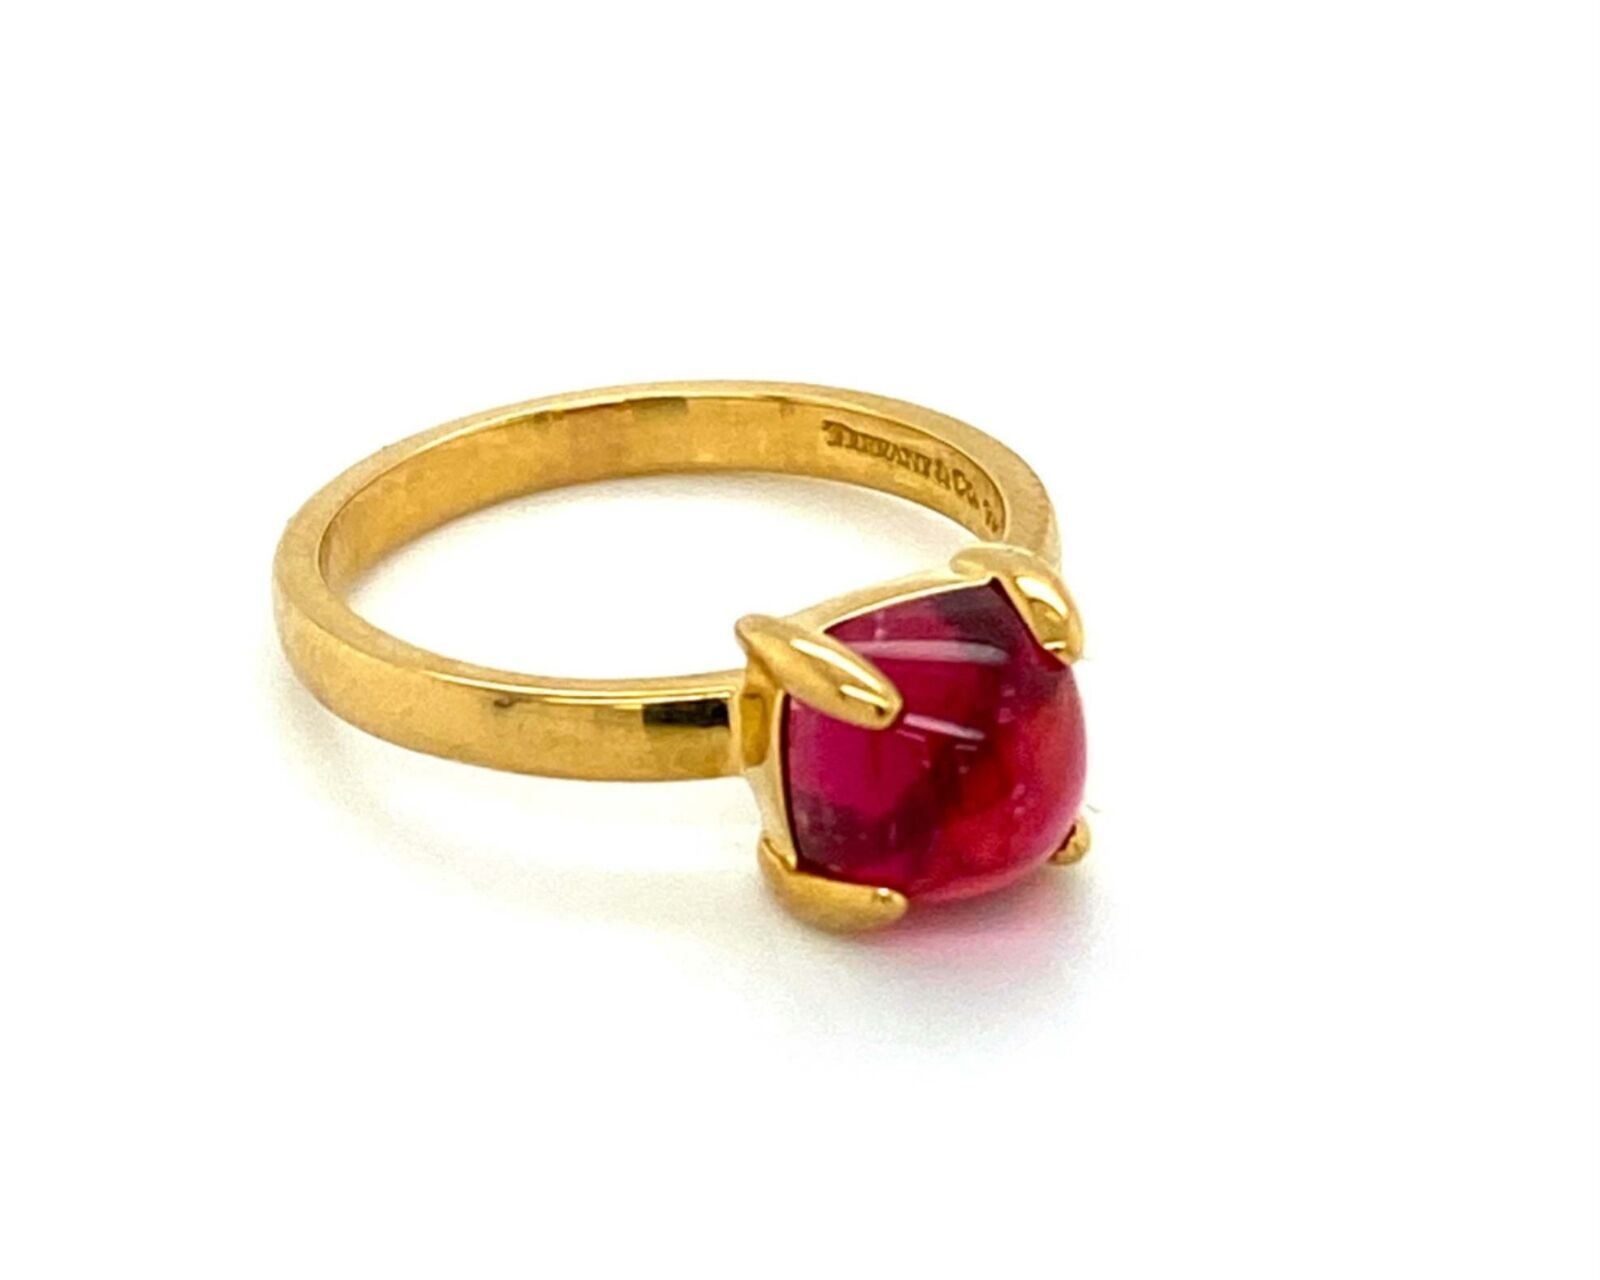 Tiffany & Co. Picasso Rubellite Gem 18k Yellow Gold Sugar Stacks Ring